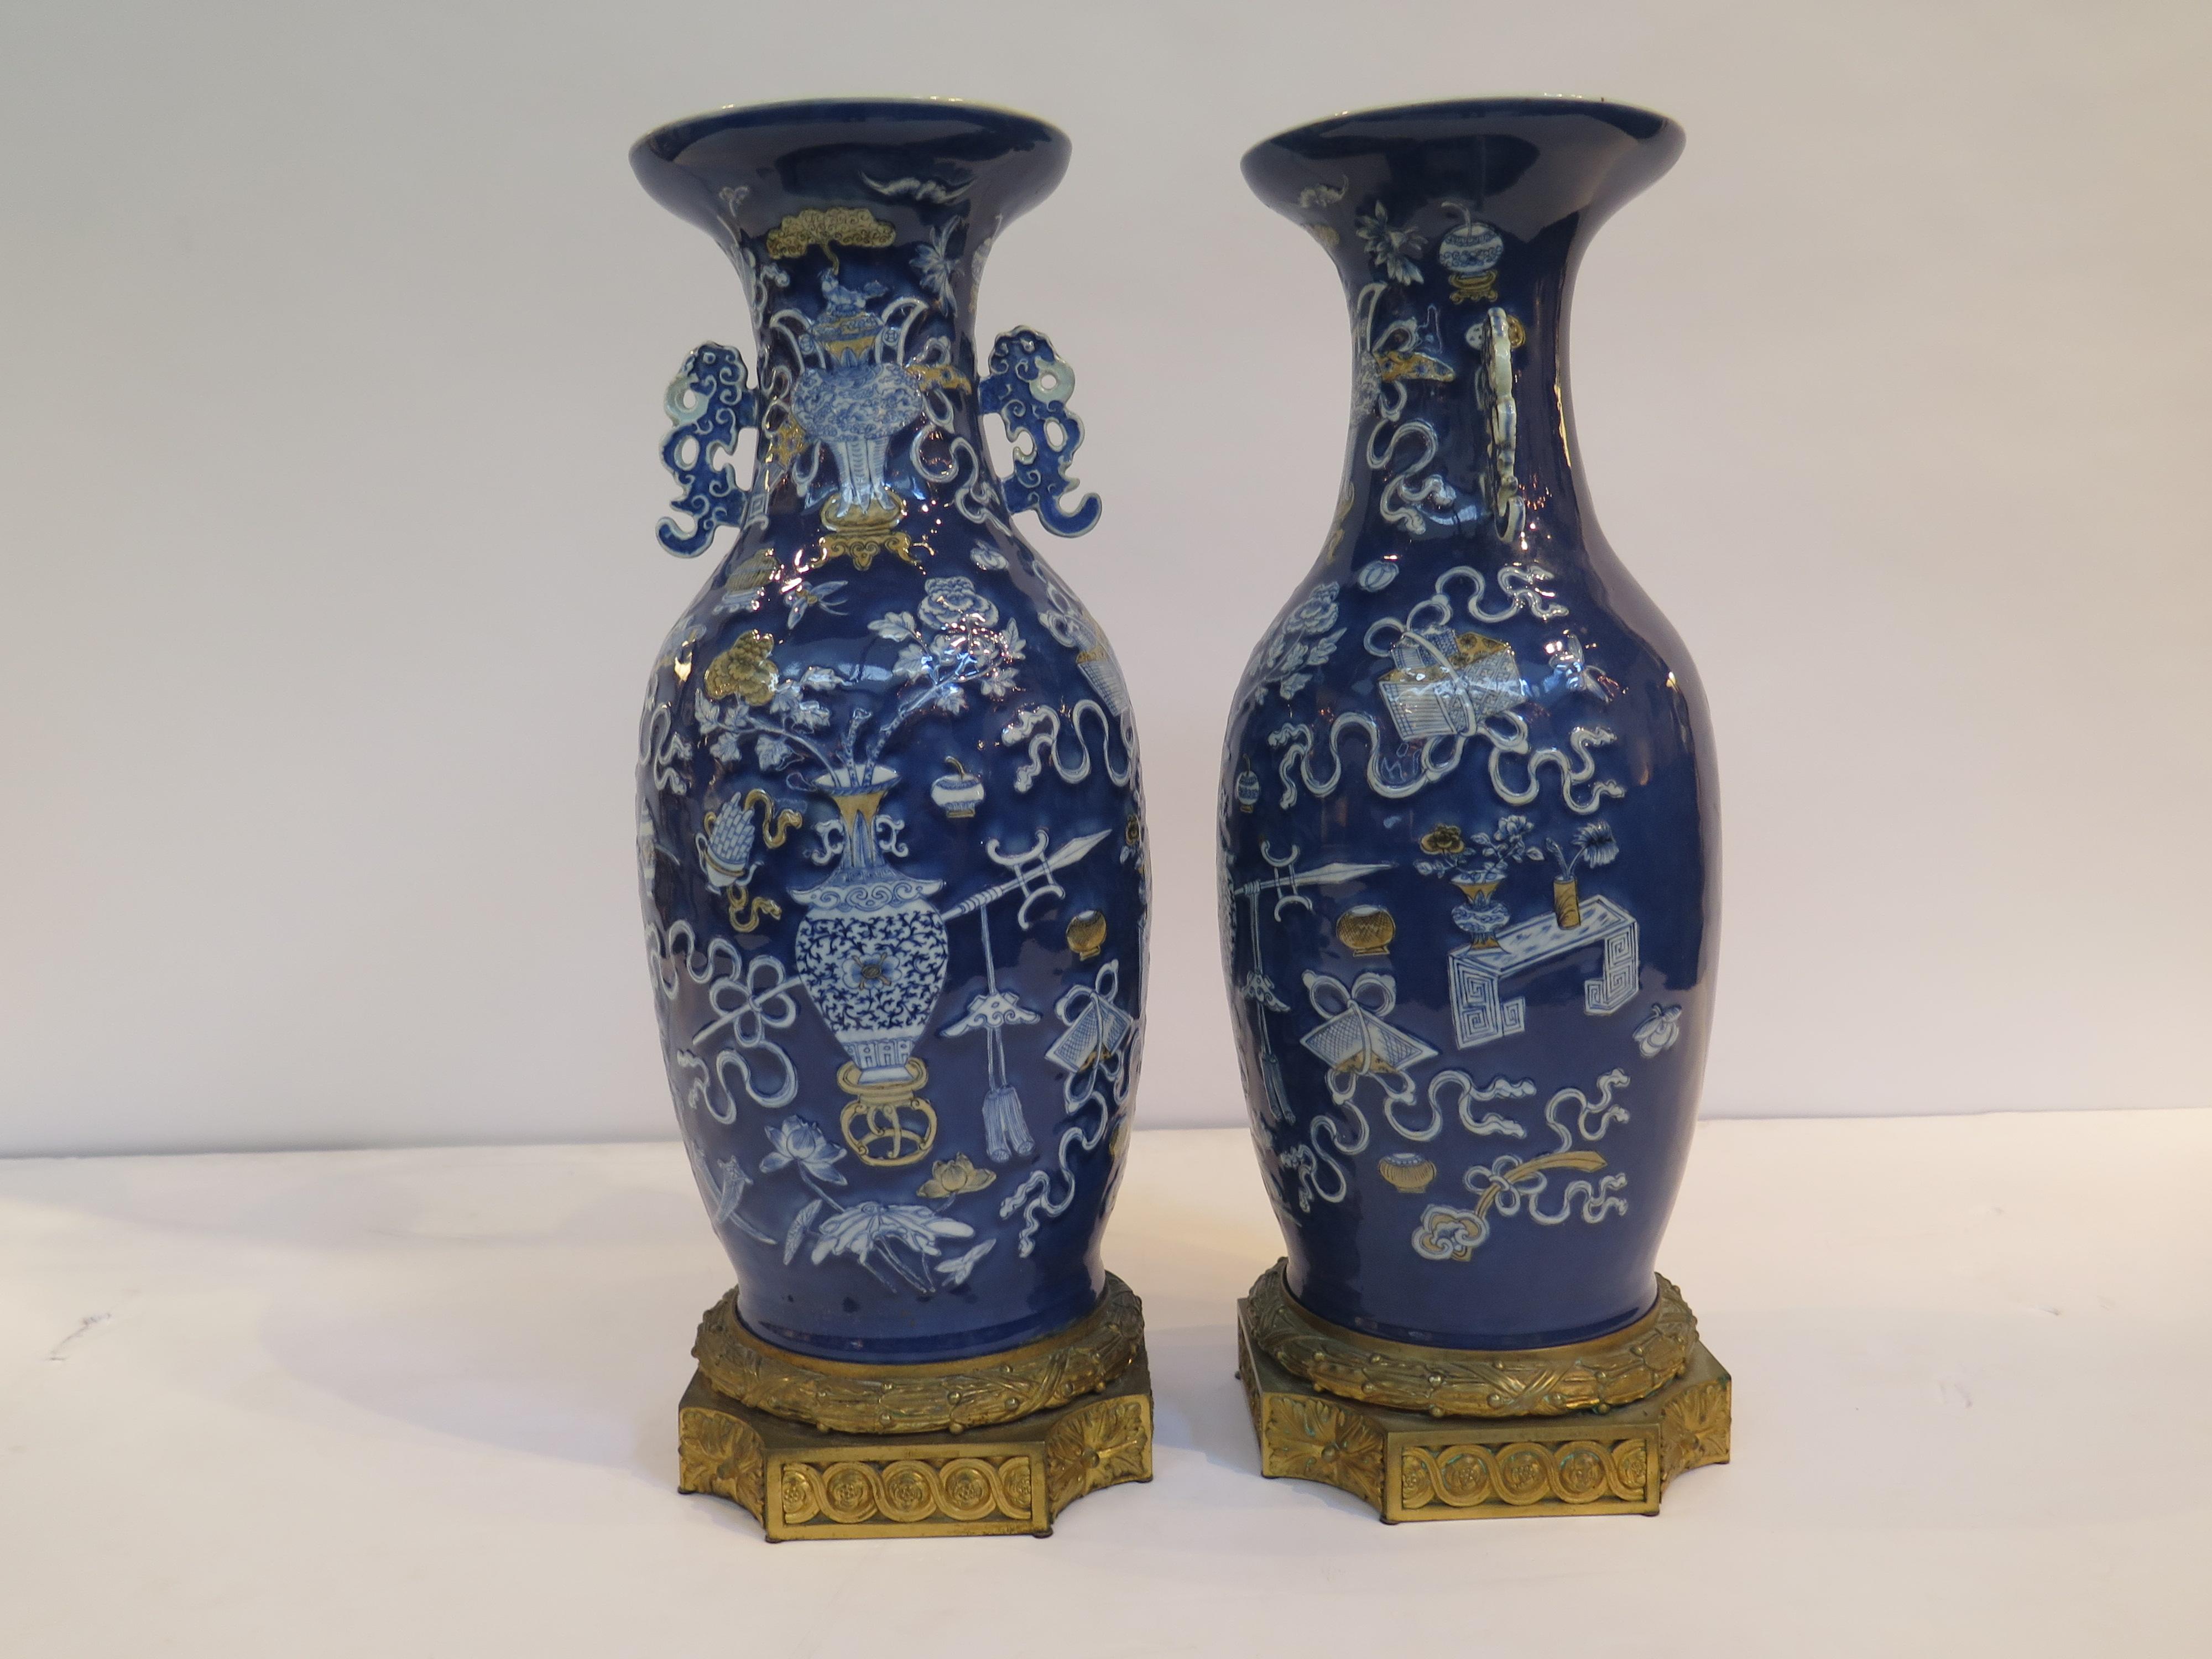 A beautiful pair of Chinese porcelain vases mounted on elaborate French gilt bronze bases. The vases with a blue background have raised white floral bouquets in center and various treasures around them. Both with elaborate handles at neck. 

Handles